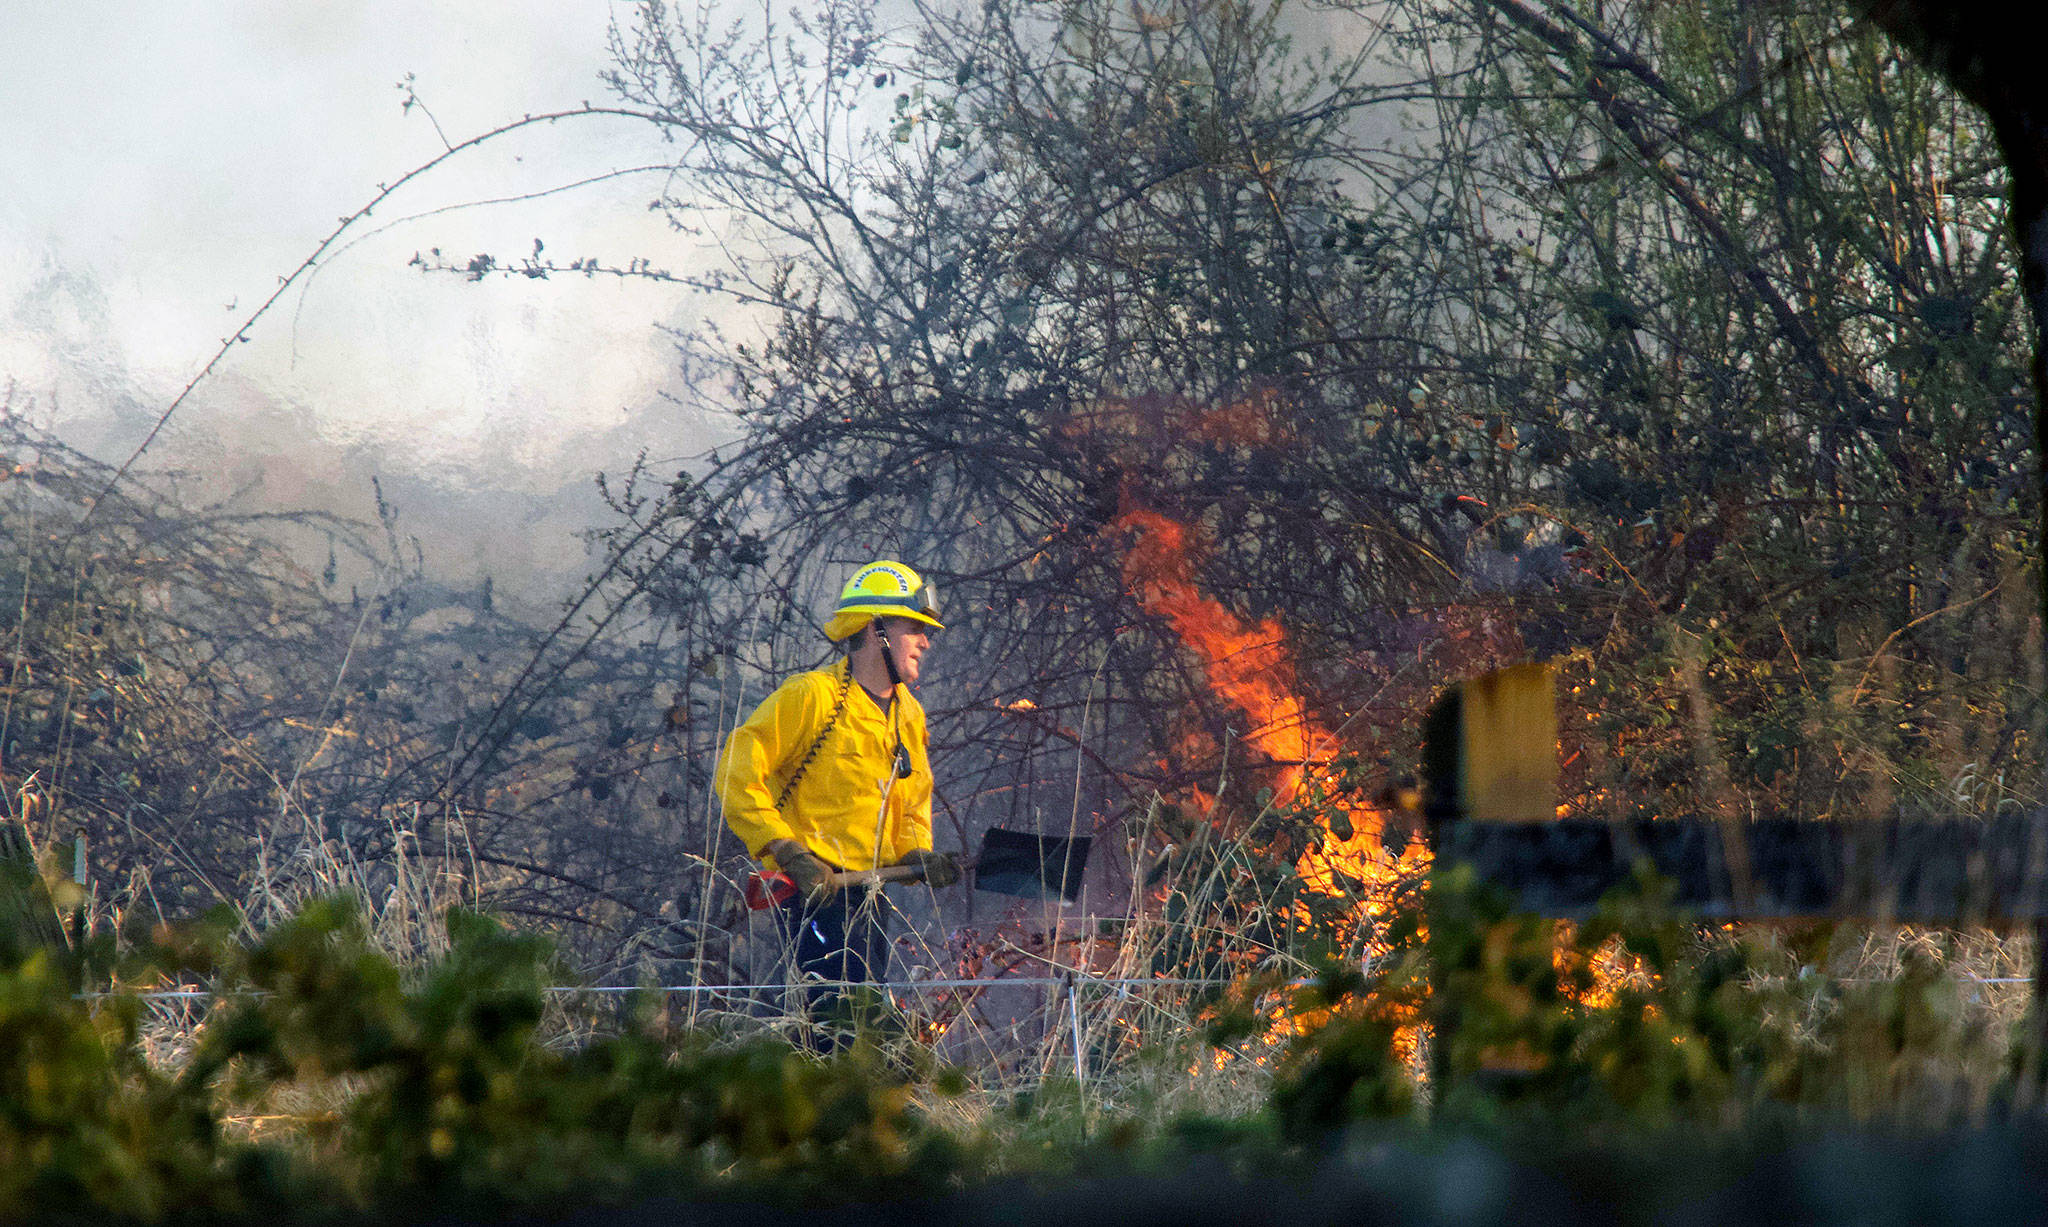 A firefighter works to suppress flames during a brush fire near Arlington on Wednesday. (Andy Bronson / The Herald)